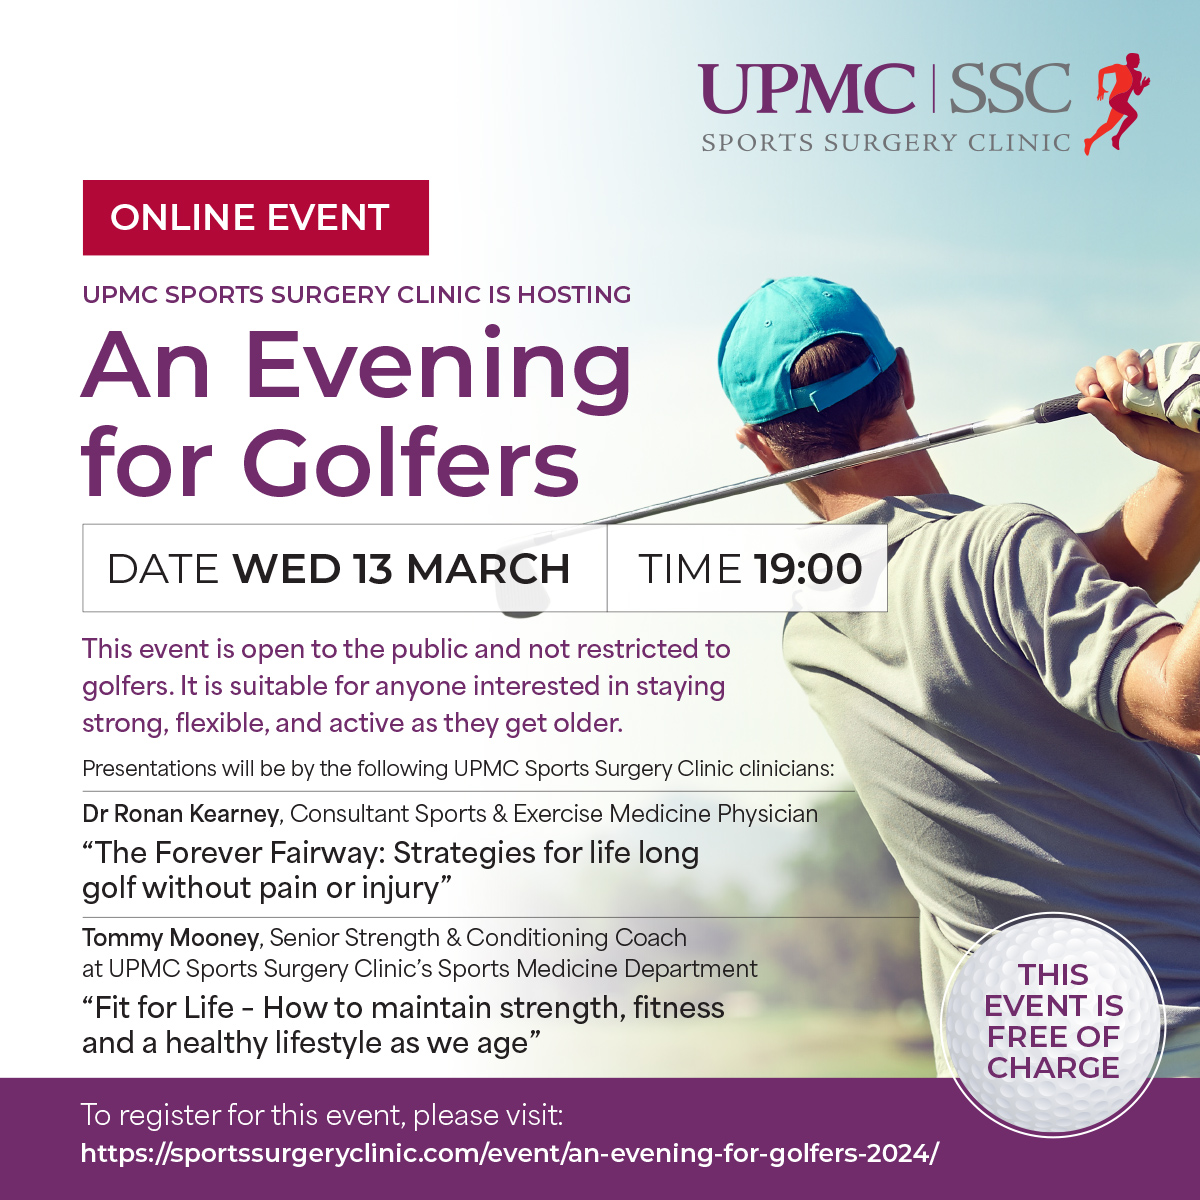 Join us on March 13th online at 'An Evening for Golfers'. This event is open to the public and not restricted to golfers. It is suitable for anyone interested in staying strong, flexible, and active as they get older. Register here: go.upmc.com/1966LIHC6